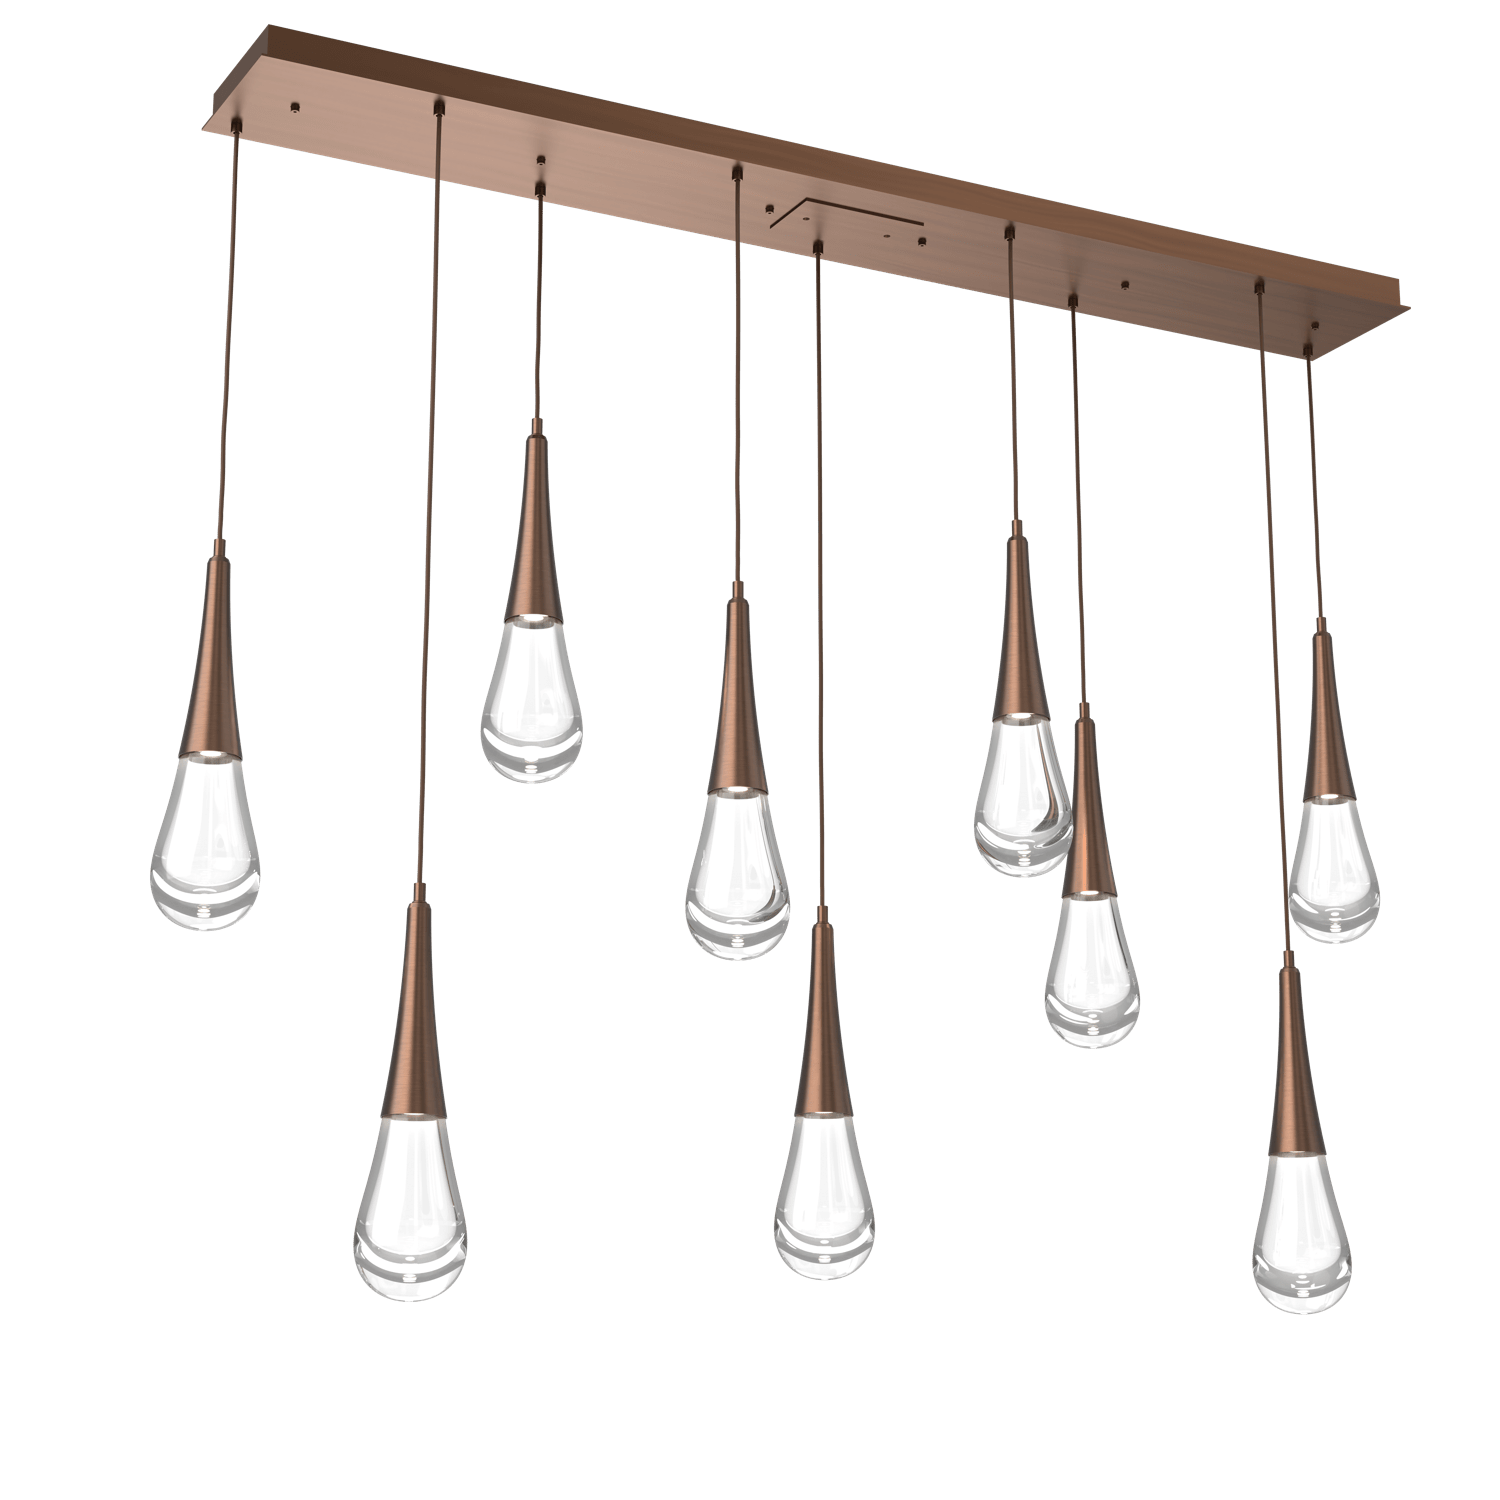 PLB0078-09-RB-Hammerton-Studio-Raindrop-9-light-linear-pendant-chandelier-with-oil-rubbed-bronze-finish-and-clear-blown-glass-shades-and-LED-lamping